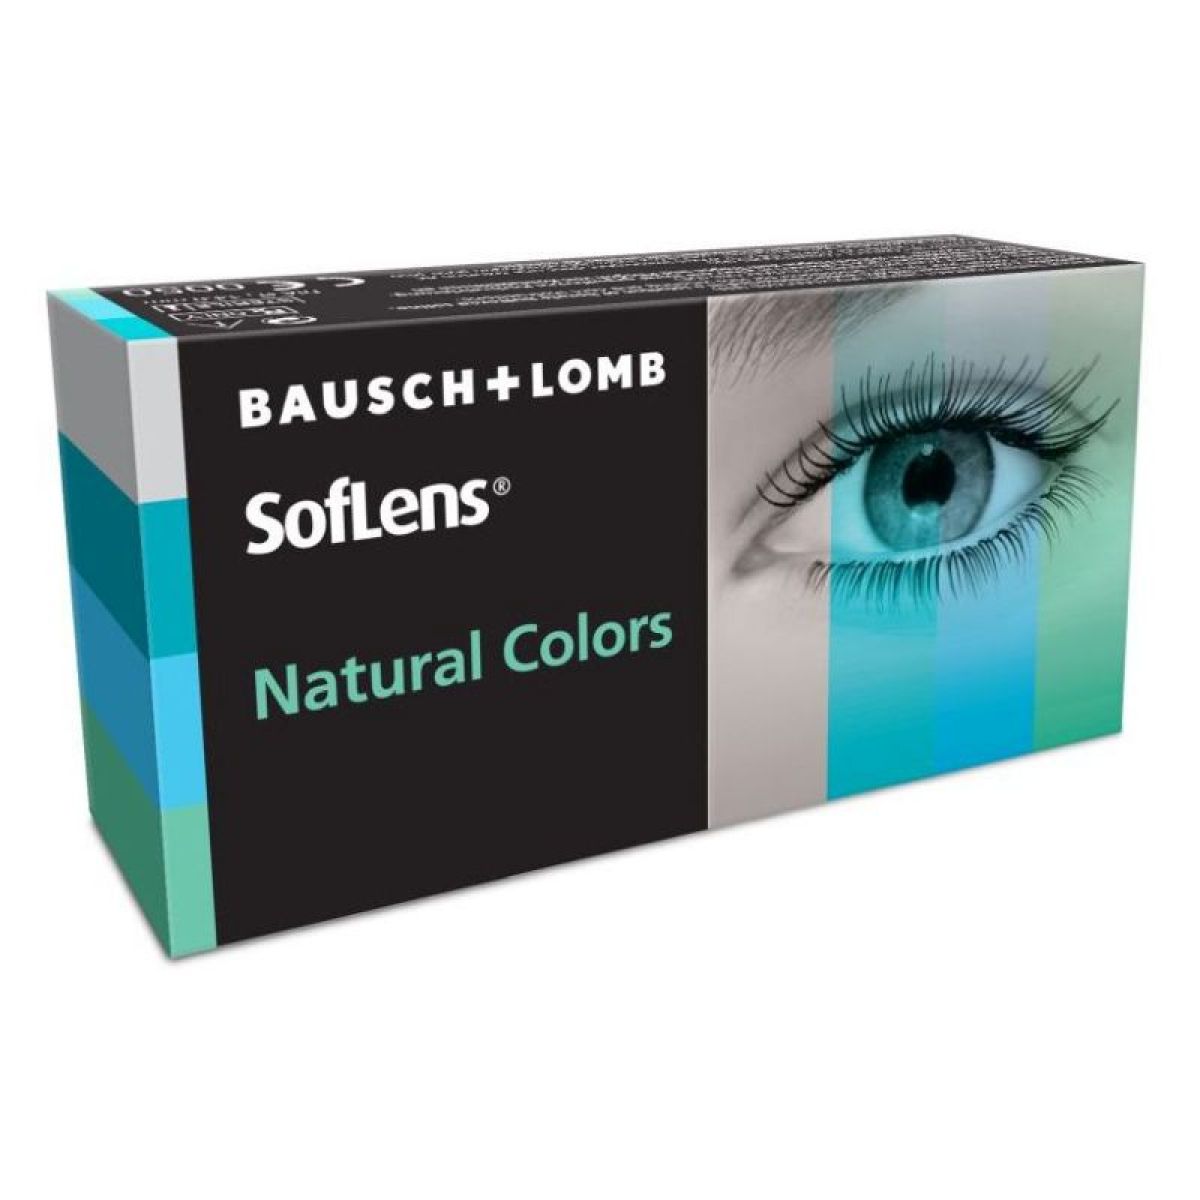 SOFLENS NATURAL COLORS MONTHLY DISPOSABLE COLORED CONTACT LENSES (2 LENSES)